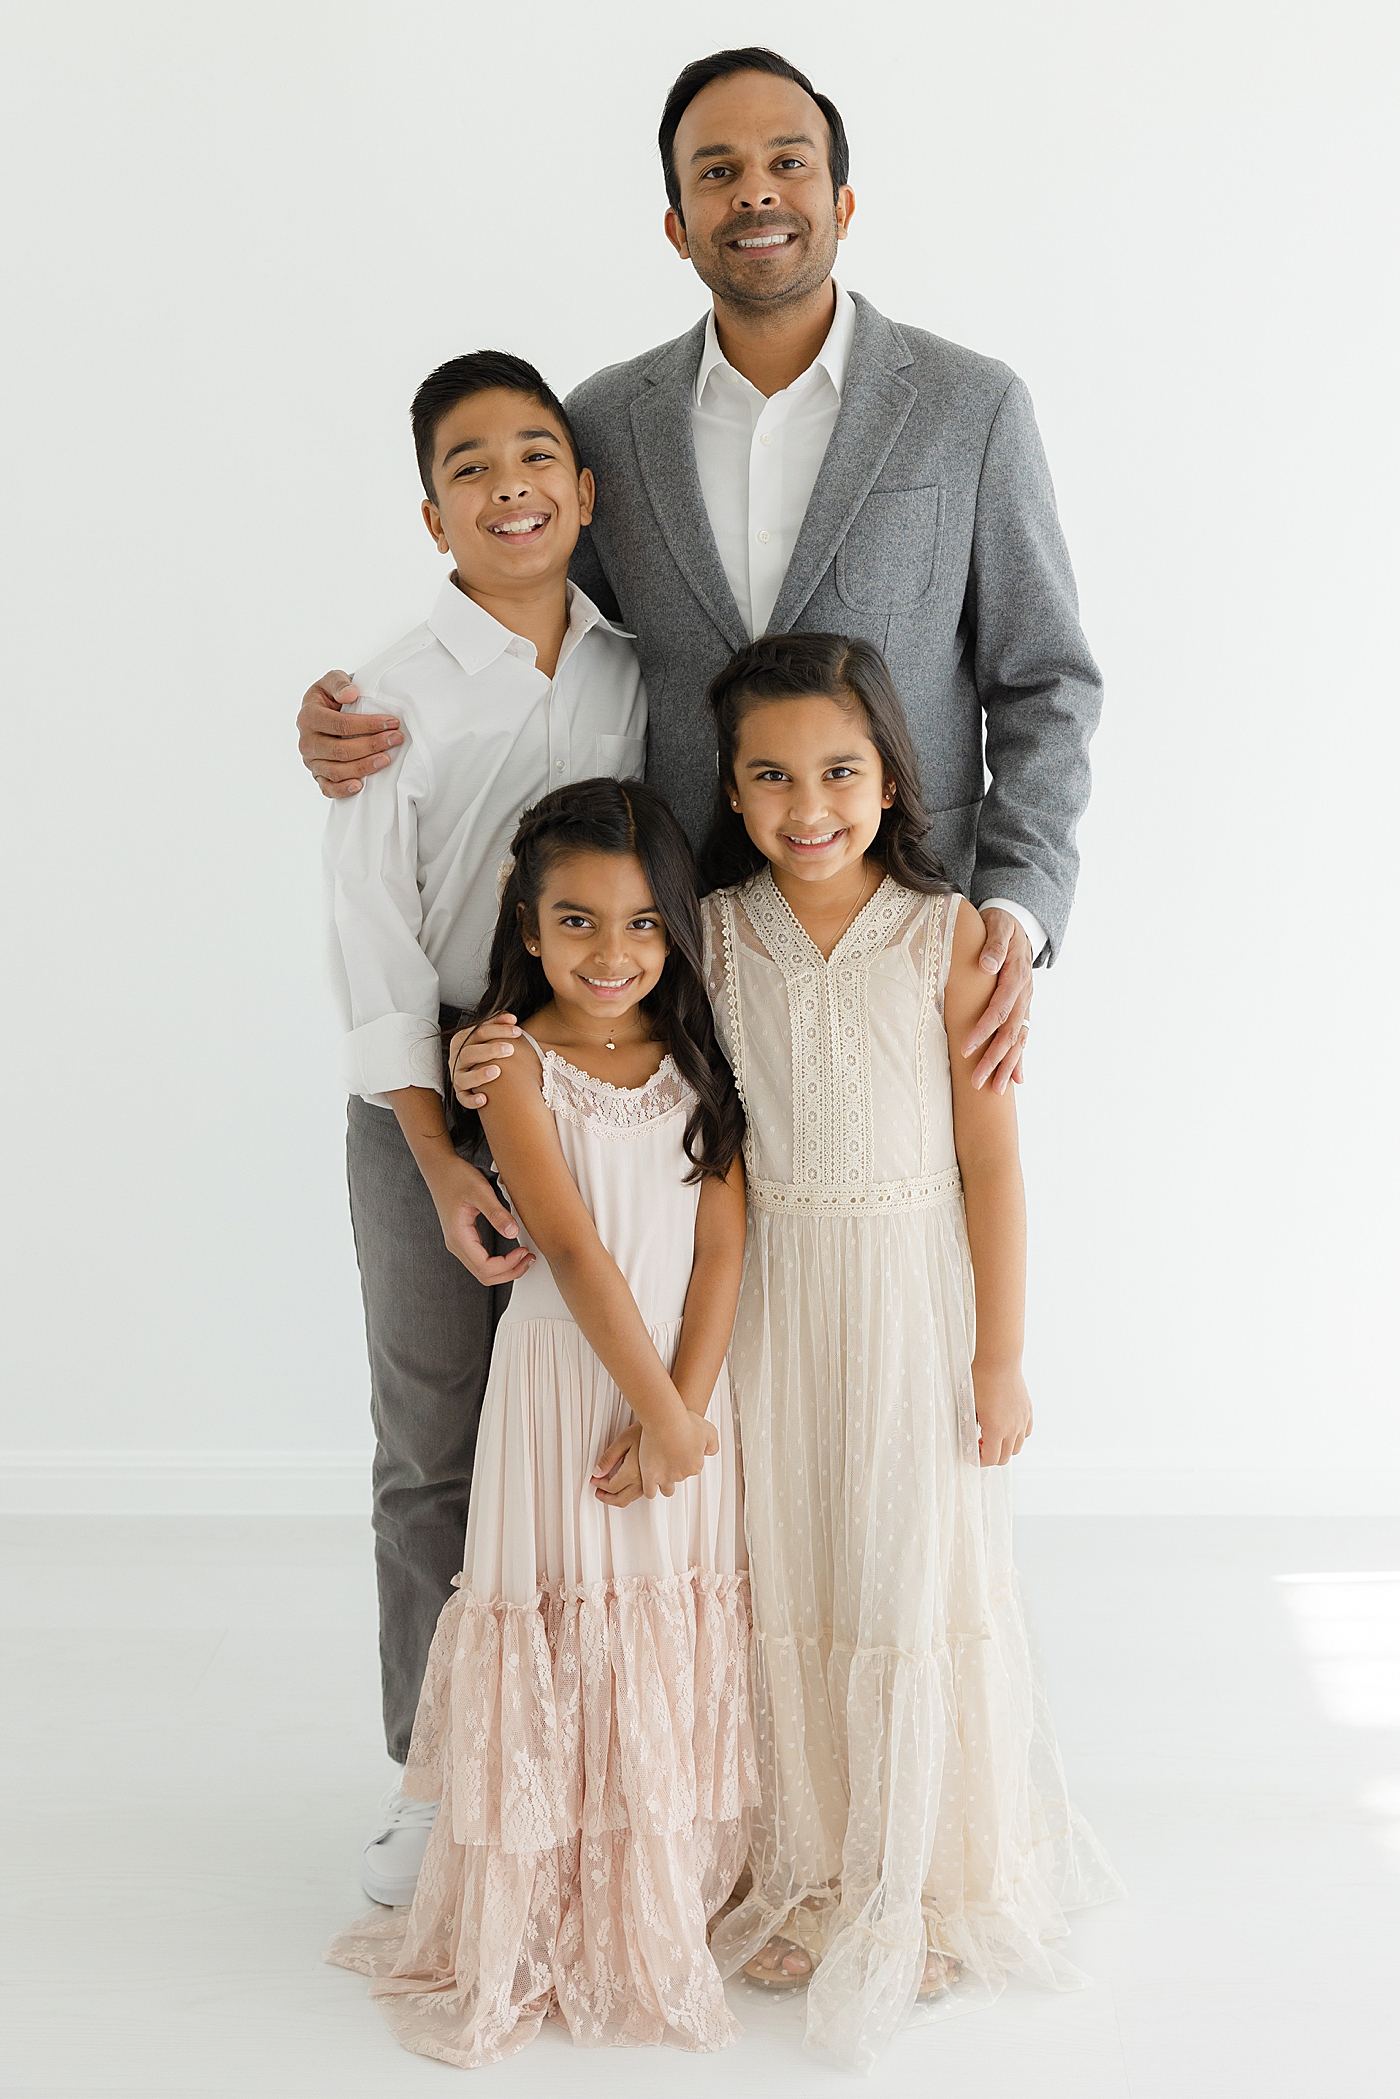 Dad posing with his three children in the studio | Image by Sana Ahmed Photography